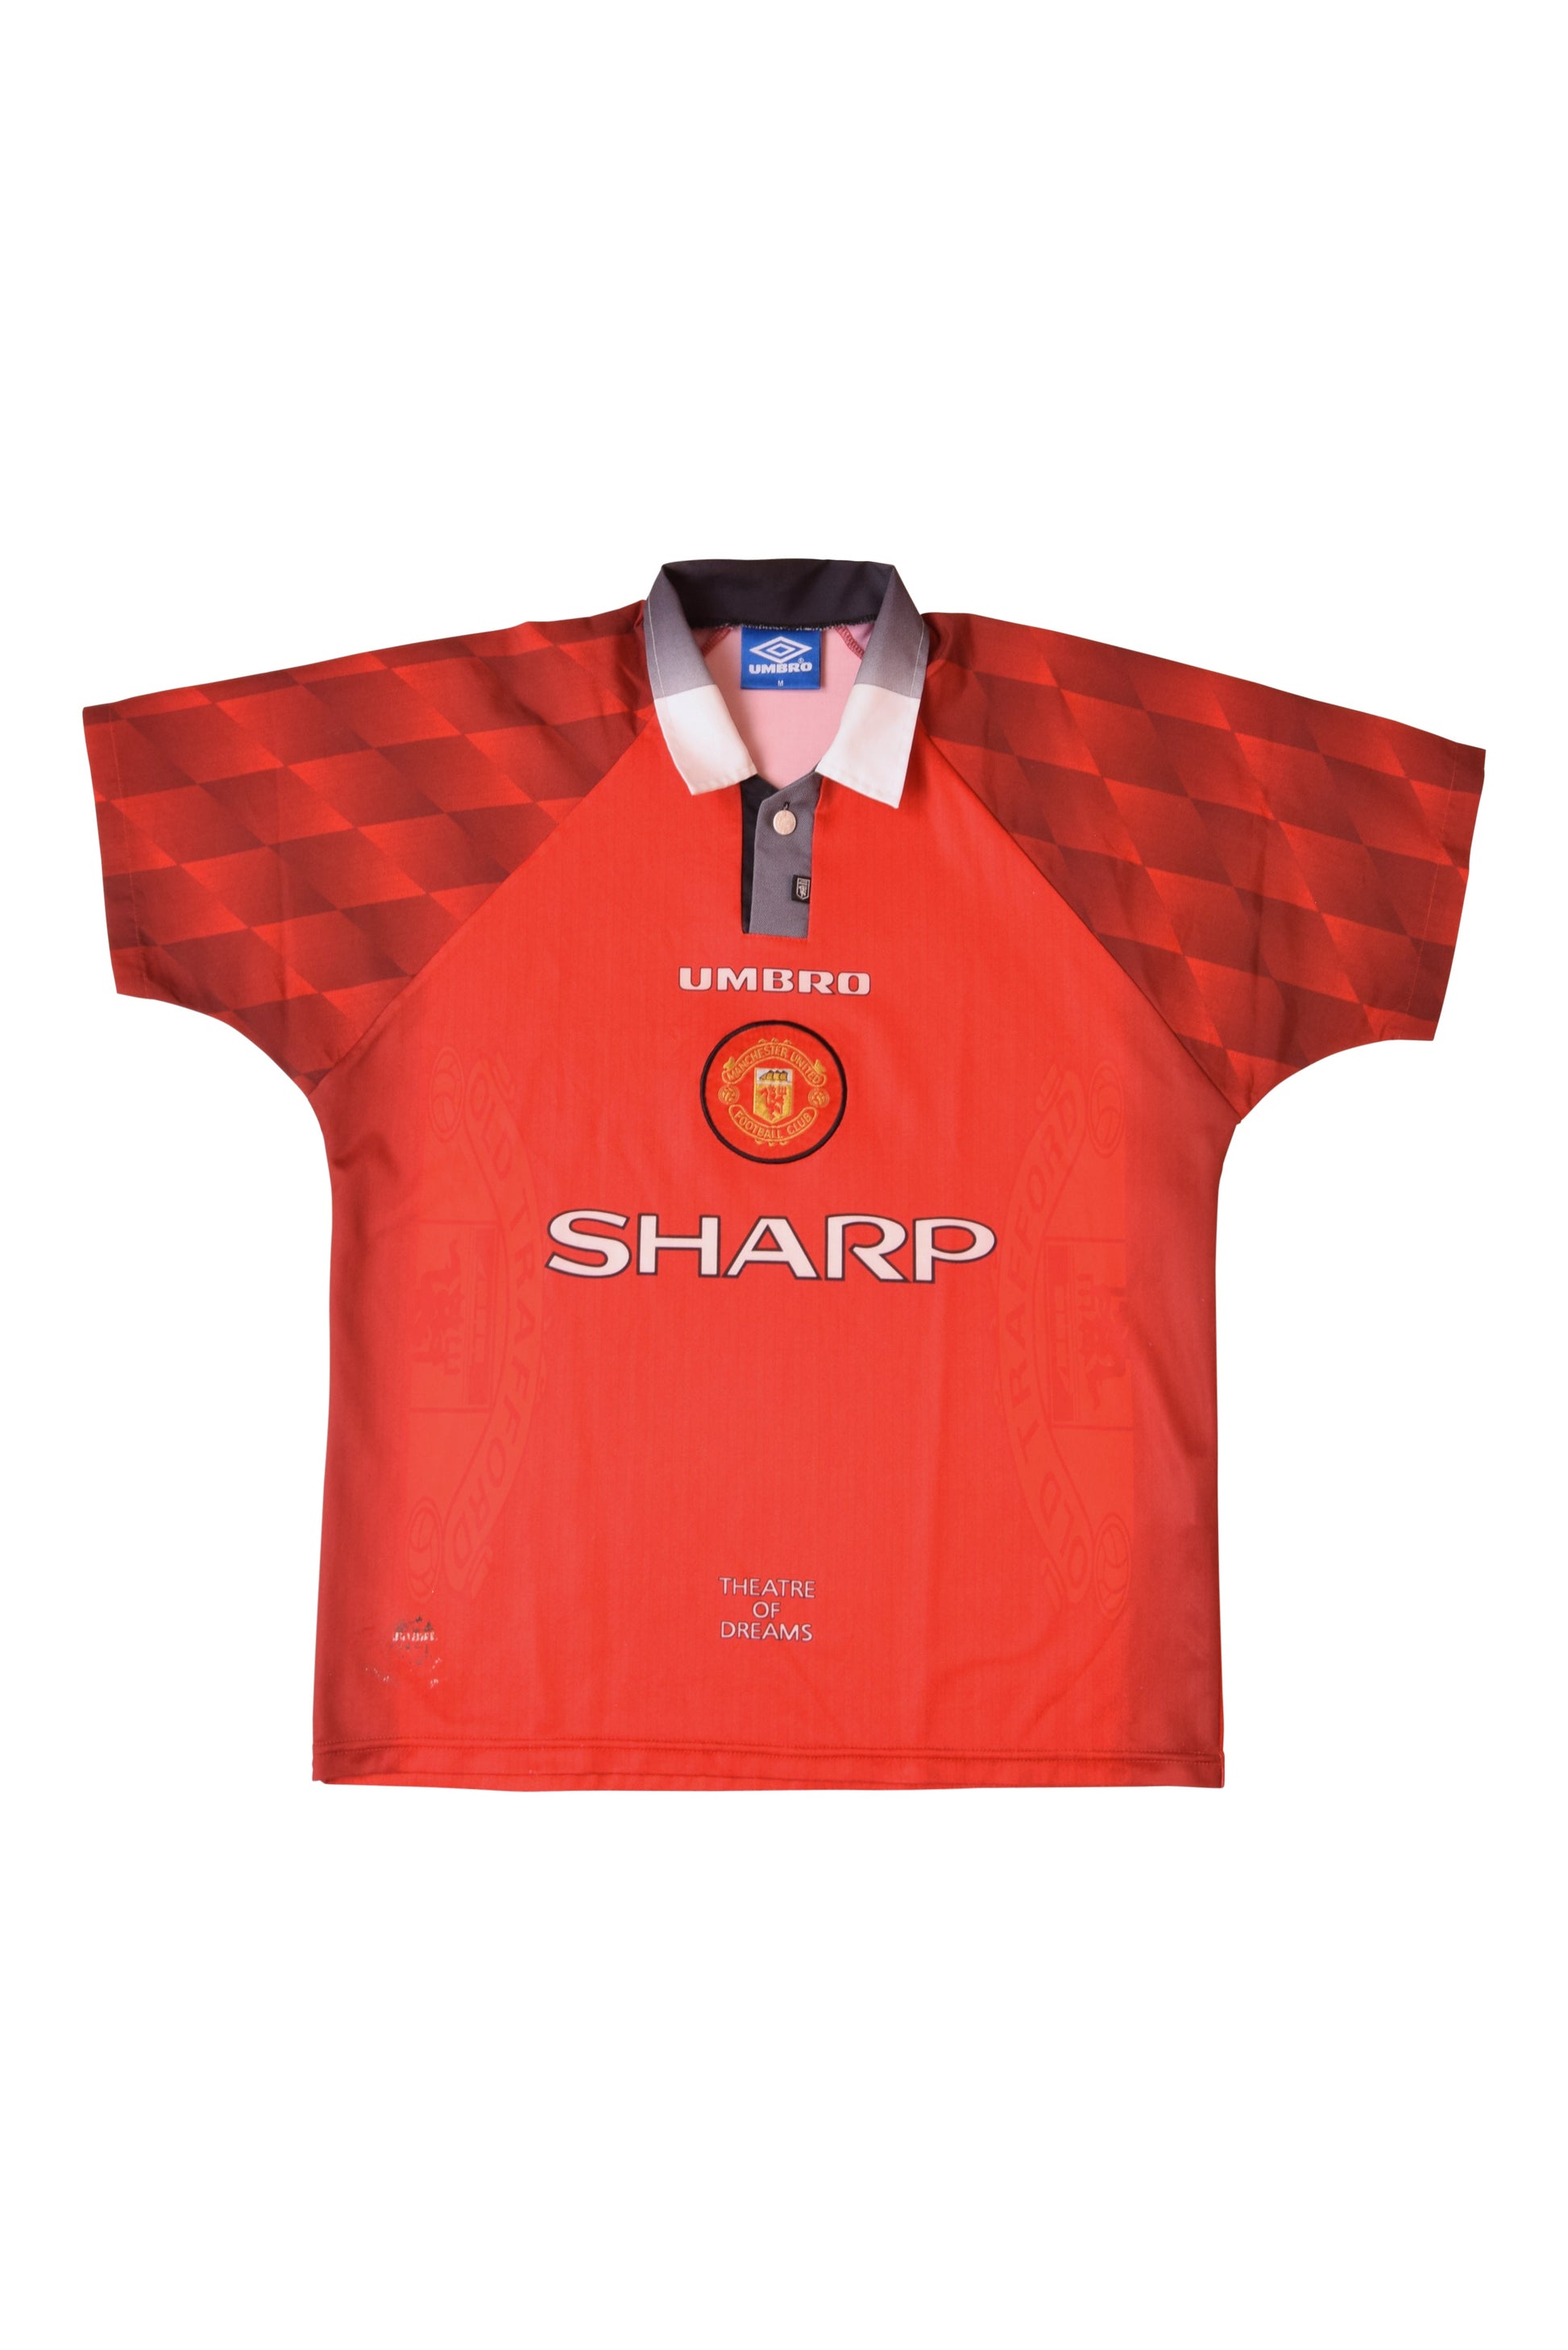 Umbro Manchester United 1997-98  Home Shirt Size XL Red